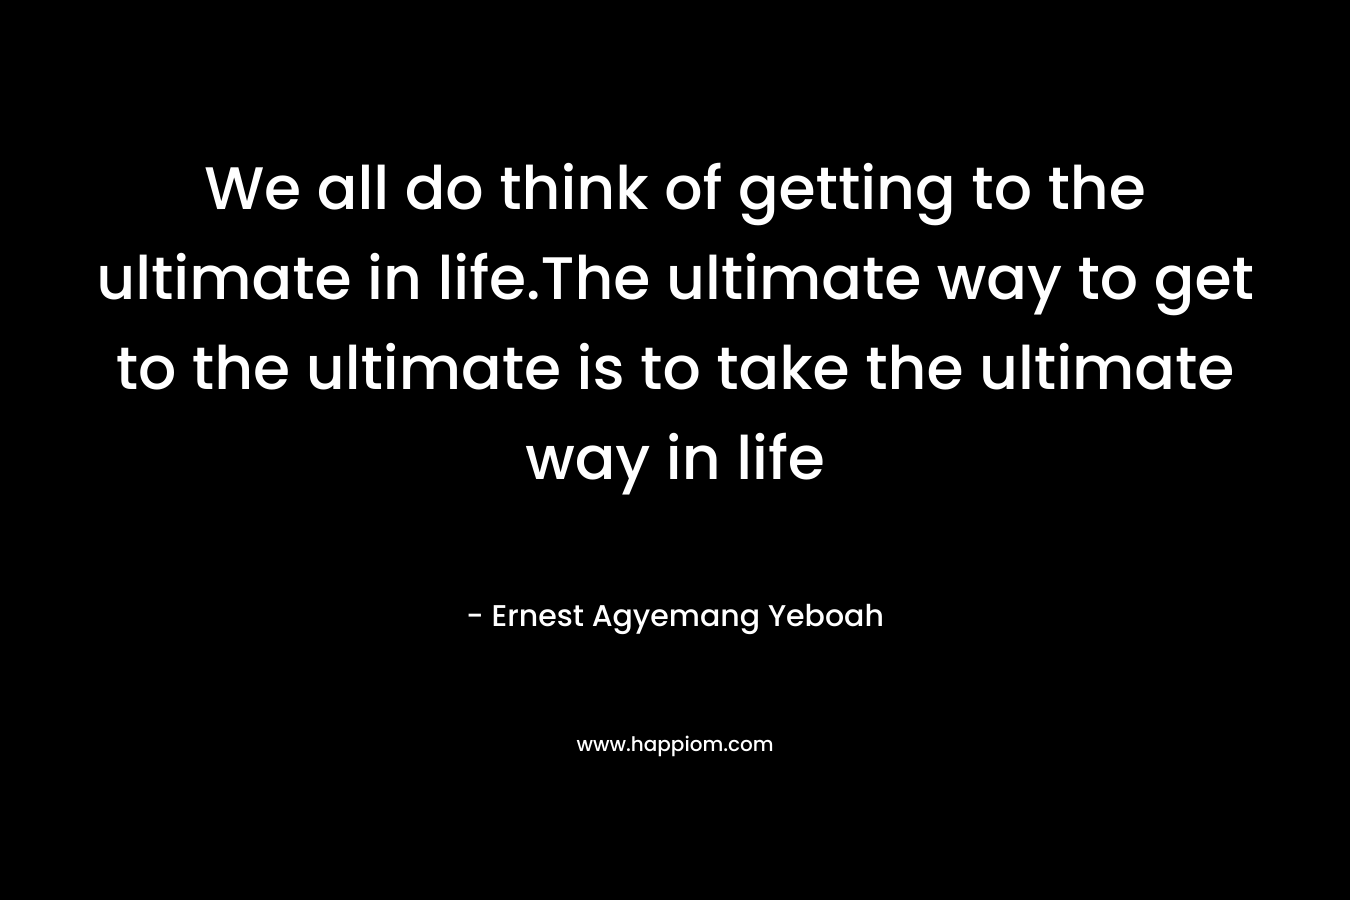 We all do think of getting to the ultimate in life.The ultimate way to get to the ultimate is to take the ultimate way in life